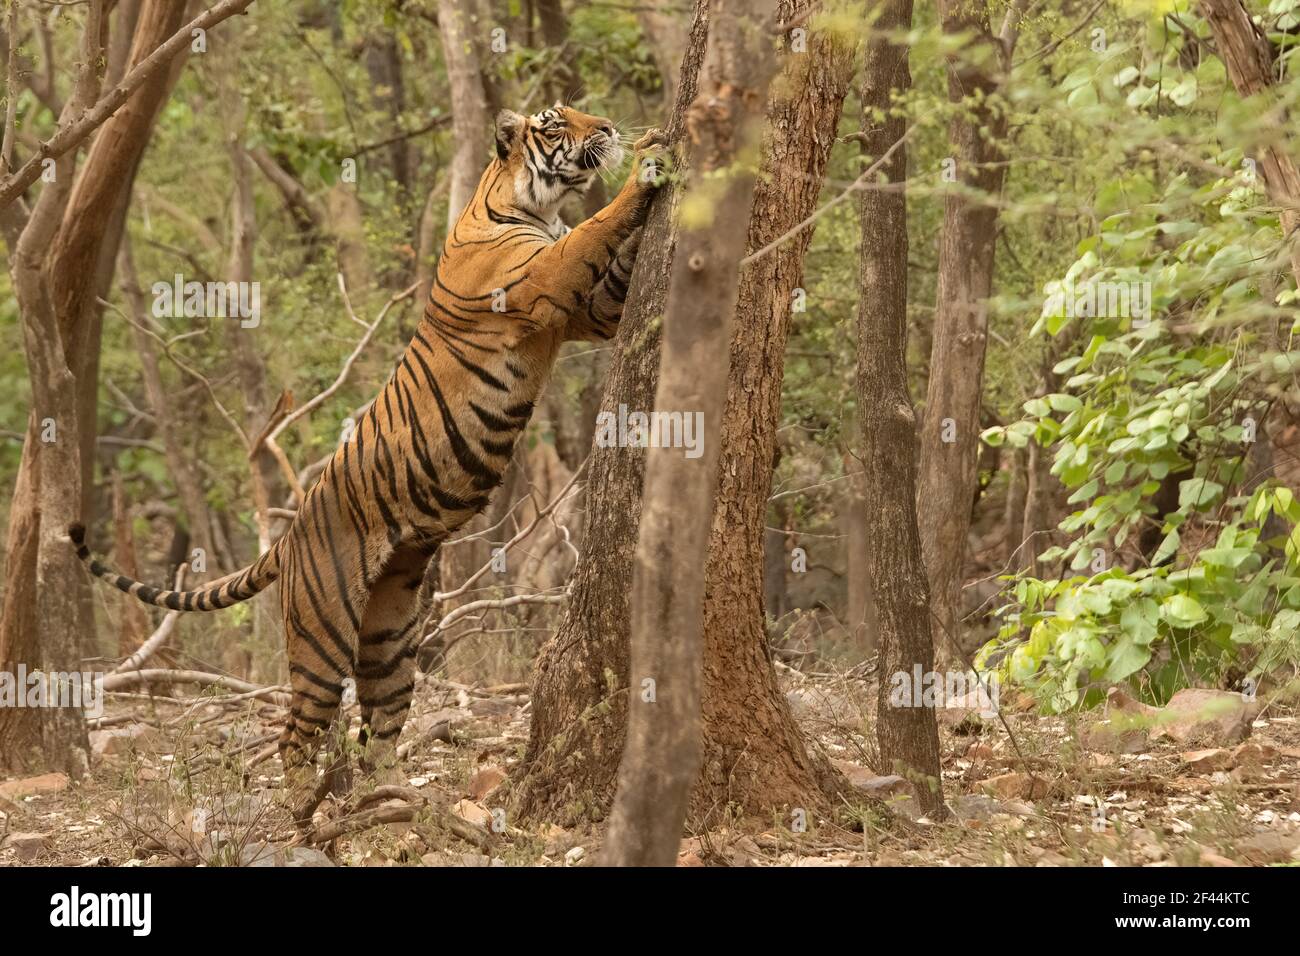 Bengal tiger standing on rear legs and stretching up to scratch a tree trunk, a way of marking territory, Ranthambore National Park, Sawai Madhopur, Rajasthan, India, Asia Stock Photo